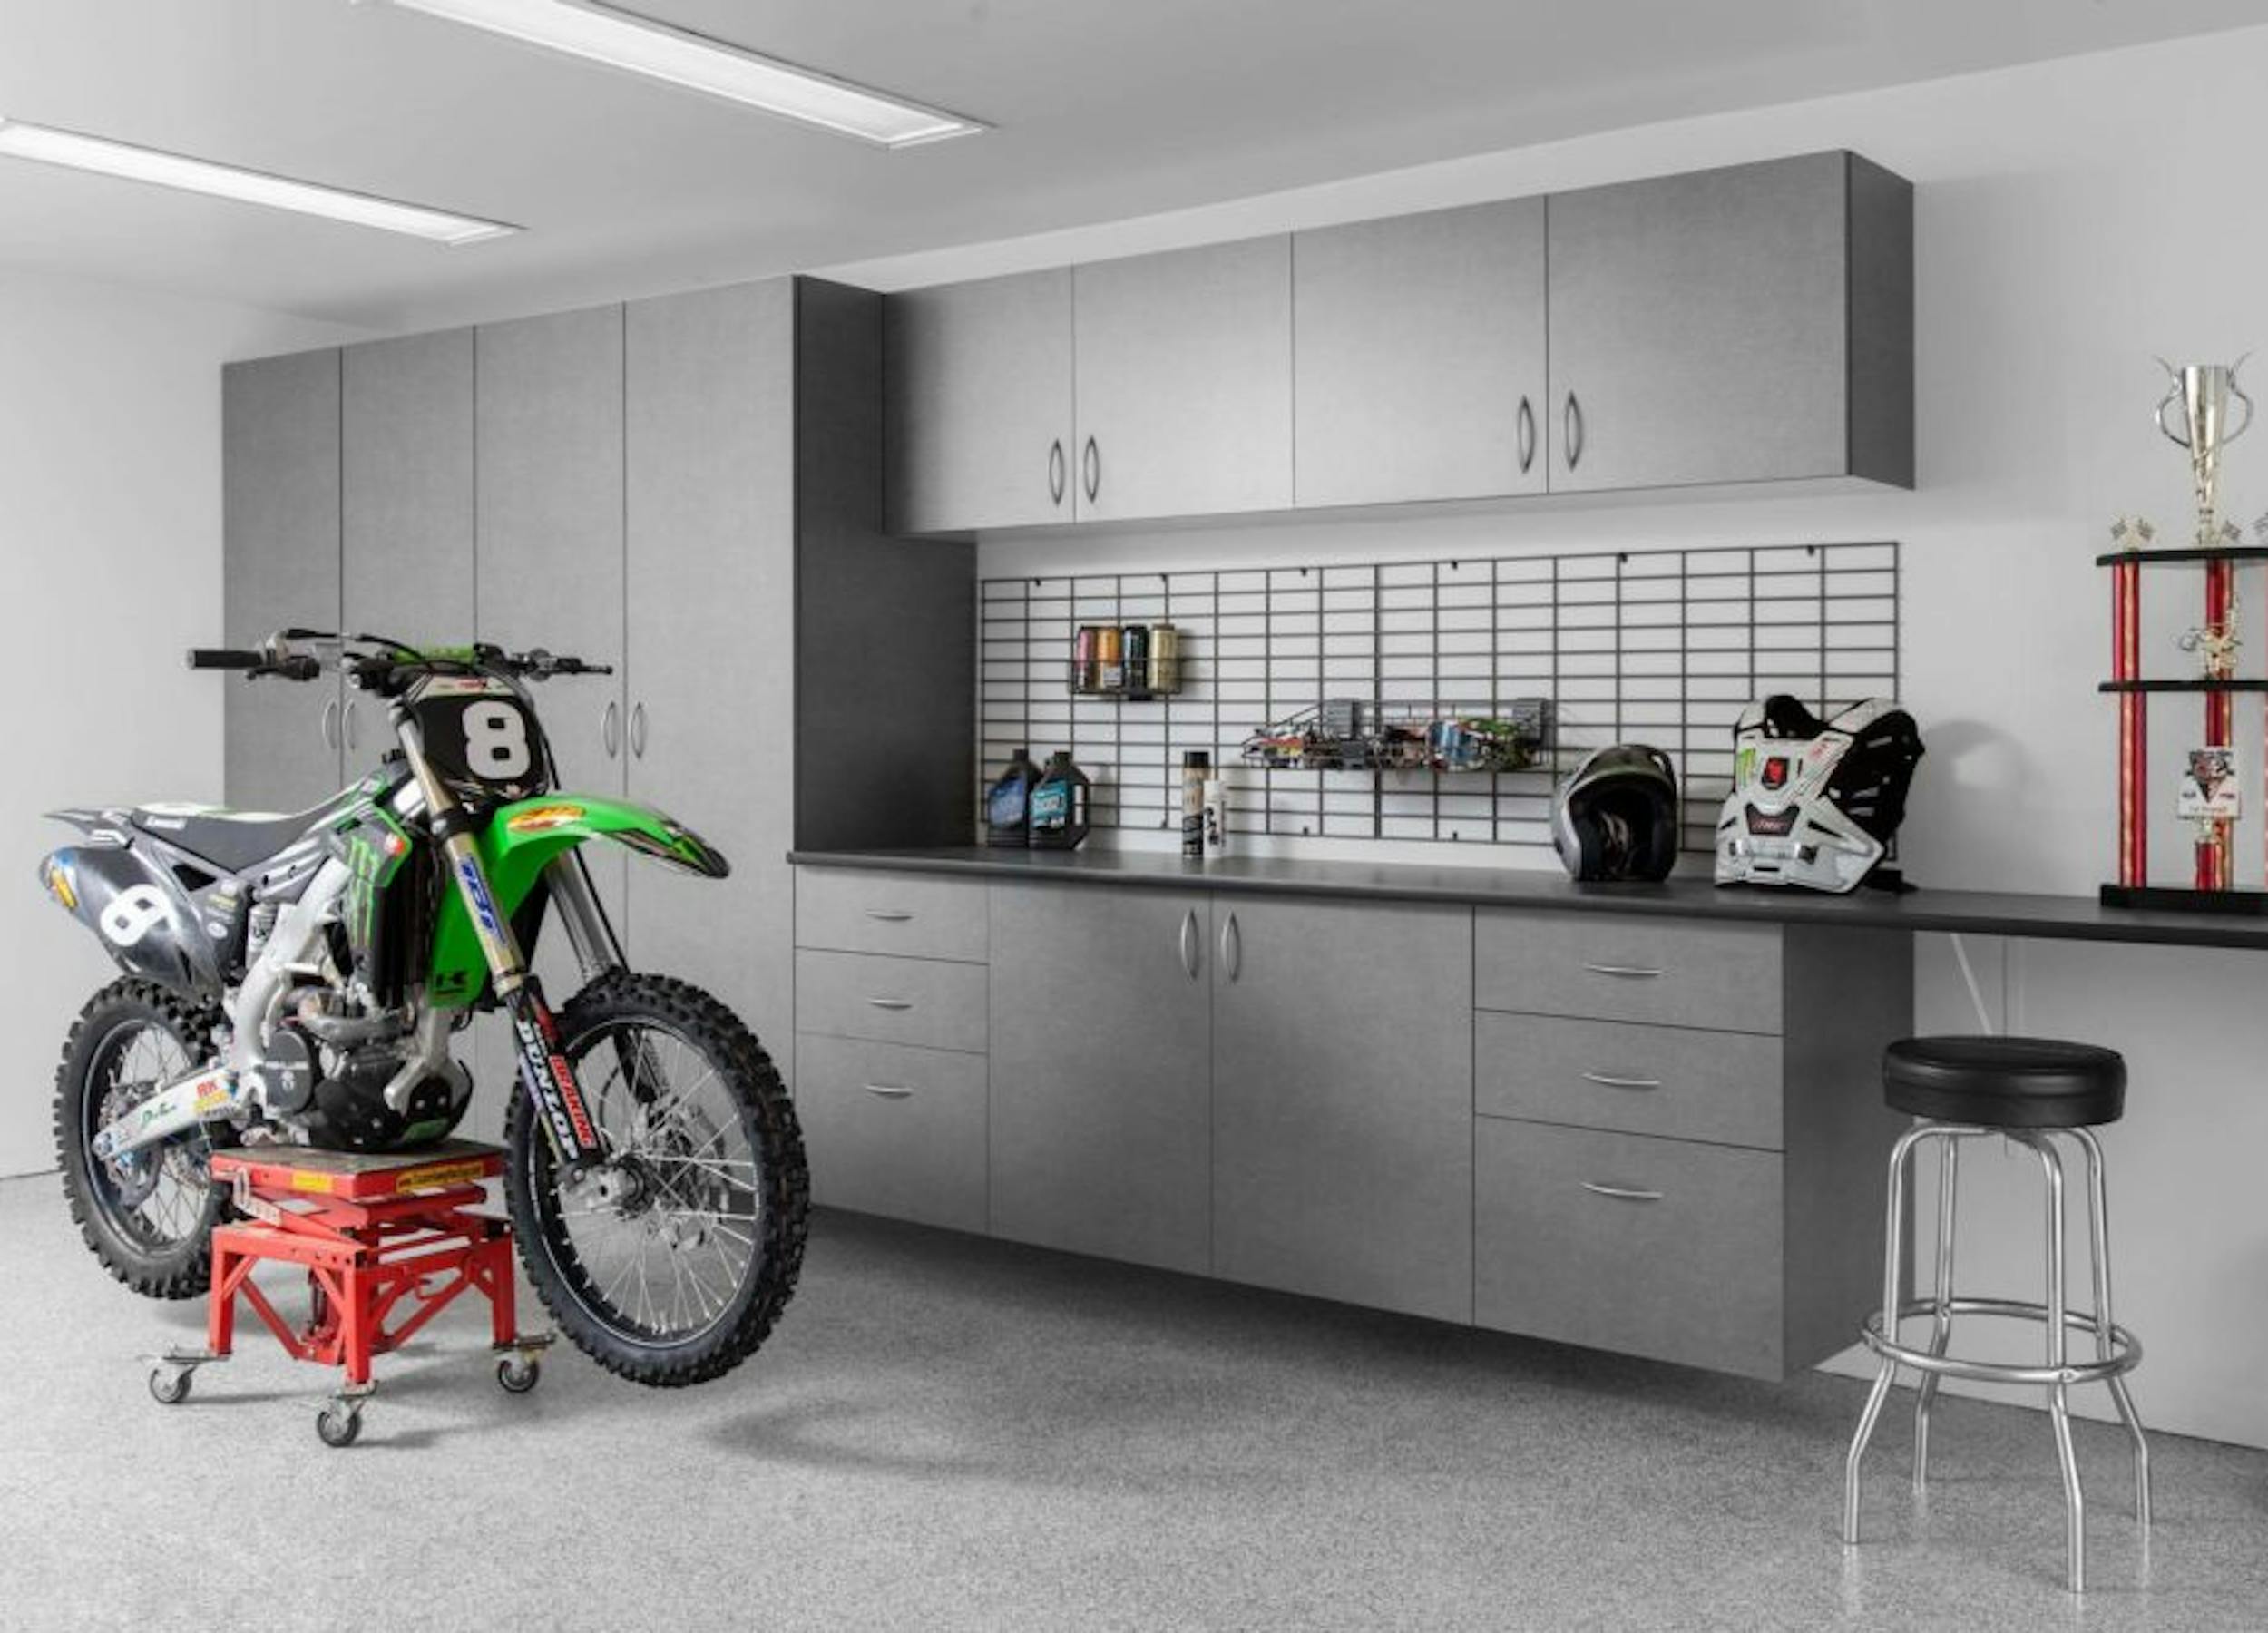 https://images.prismic.io/one-day-marketing/887482a9-581f-4401-927f-a498a6665426_garage-storage-cabinets-pewter-1024x663.jpg?auto=compress,format&rect=0,0,921,663&w=2500&h=1800